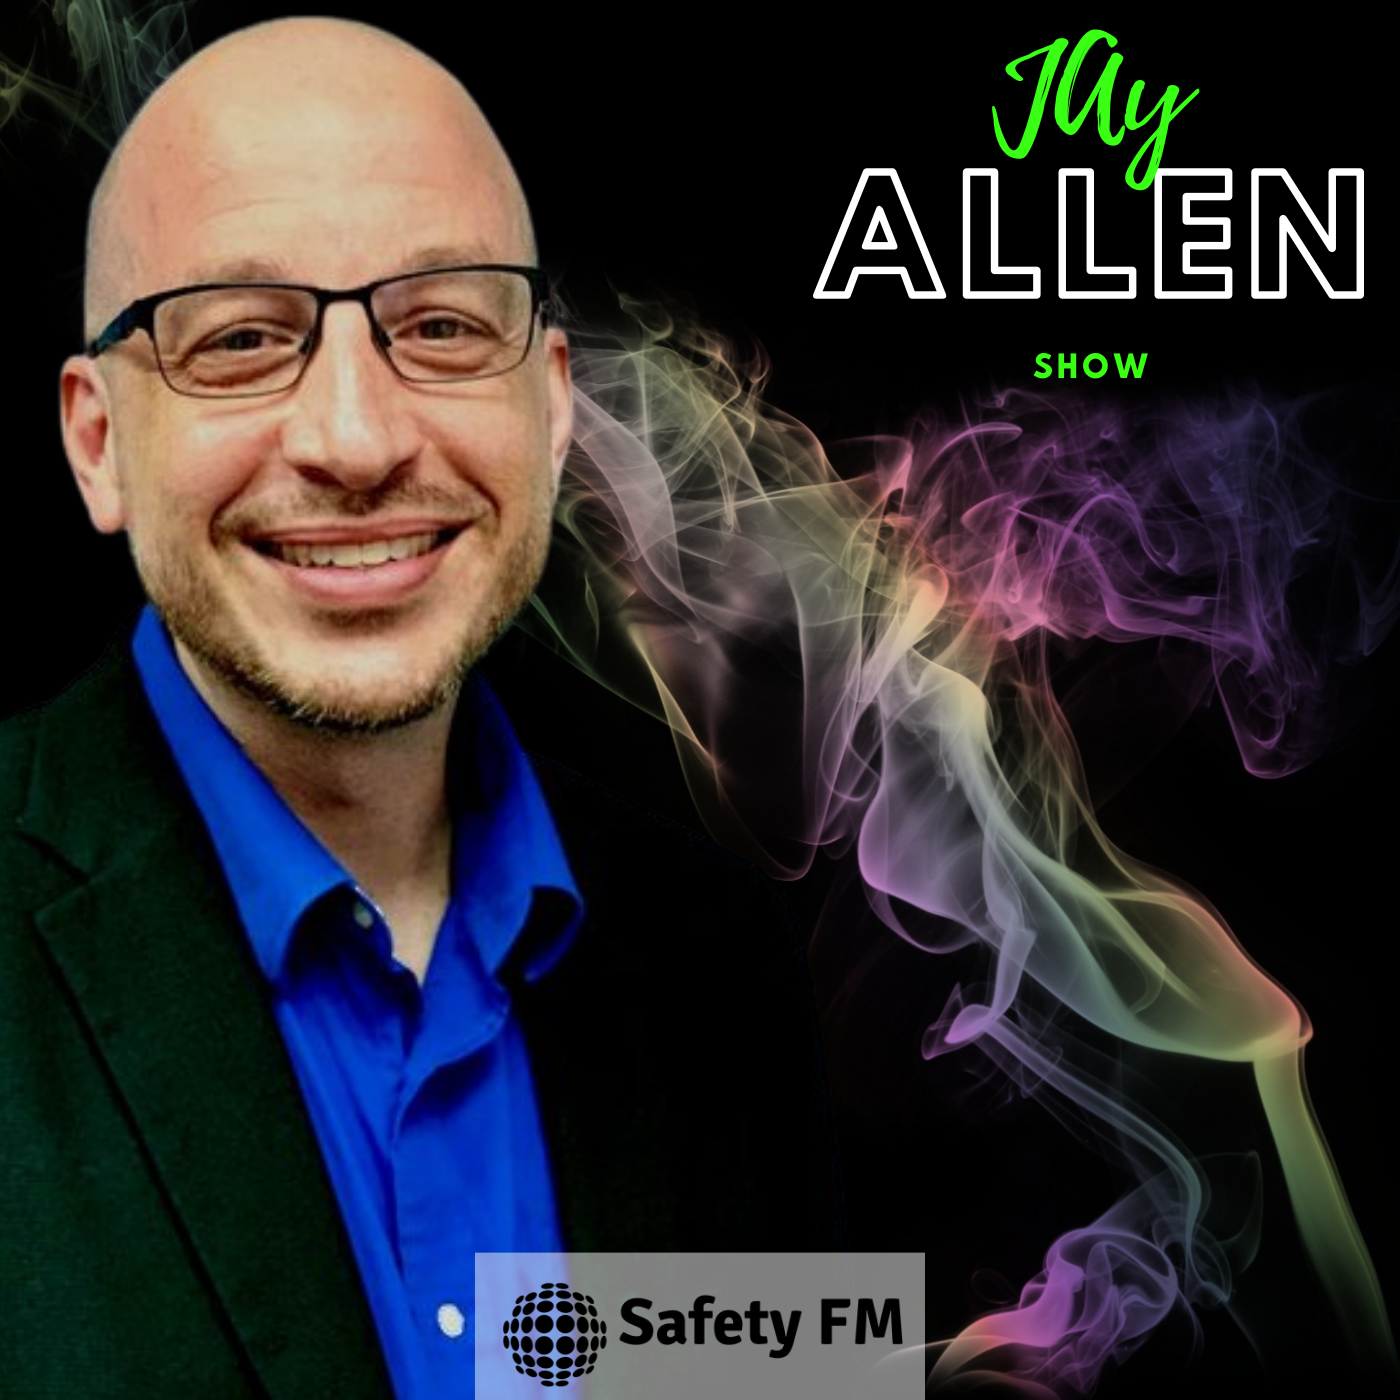 The Jay Allen Show on Safety FM art image